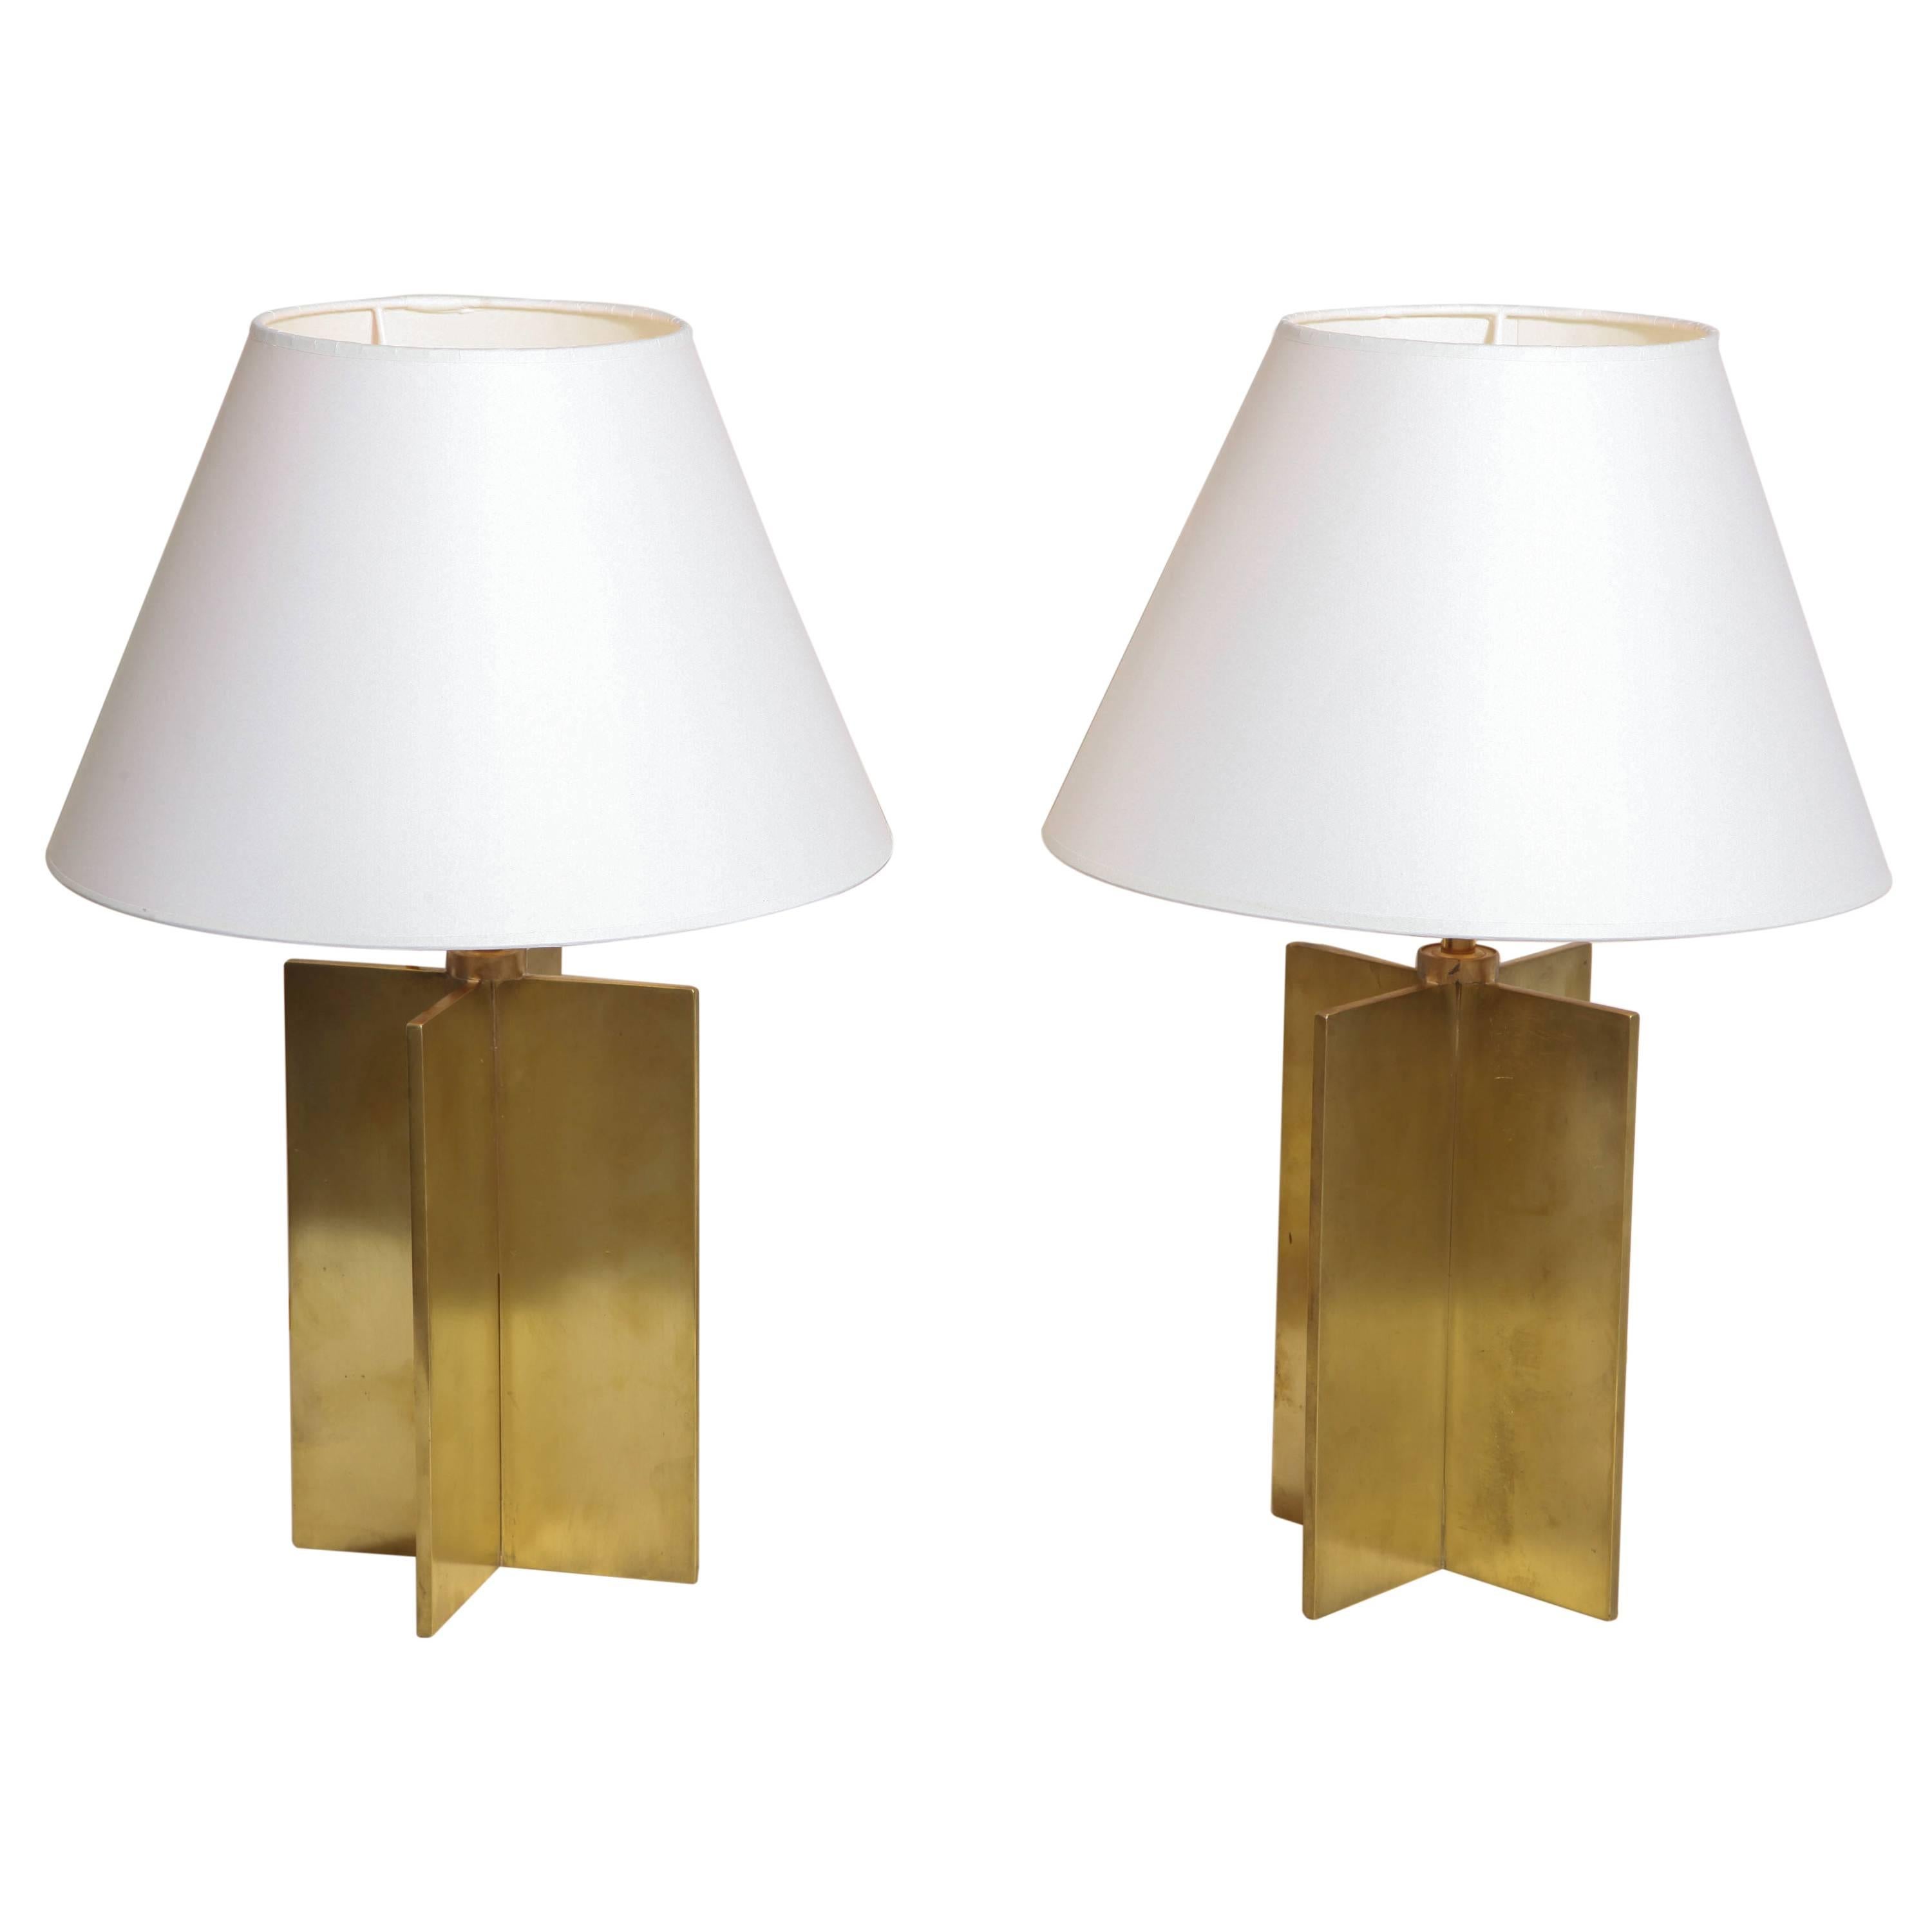 Jean-Michel Frank French Art Deco Pair of 'Croisillon' Table Lamps For Sale